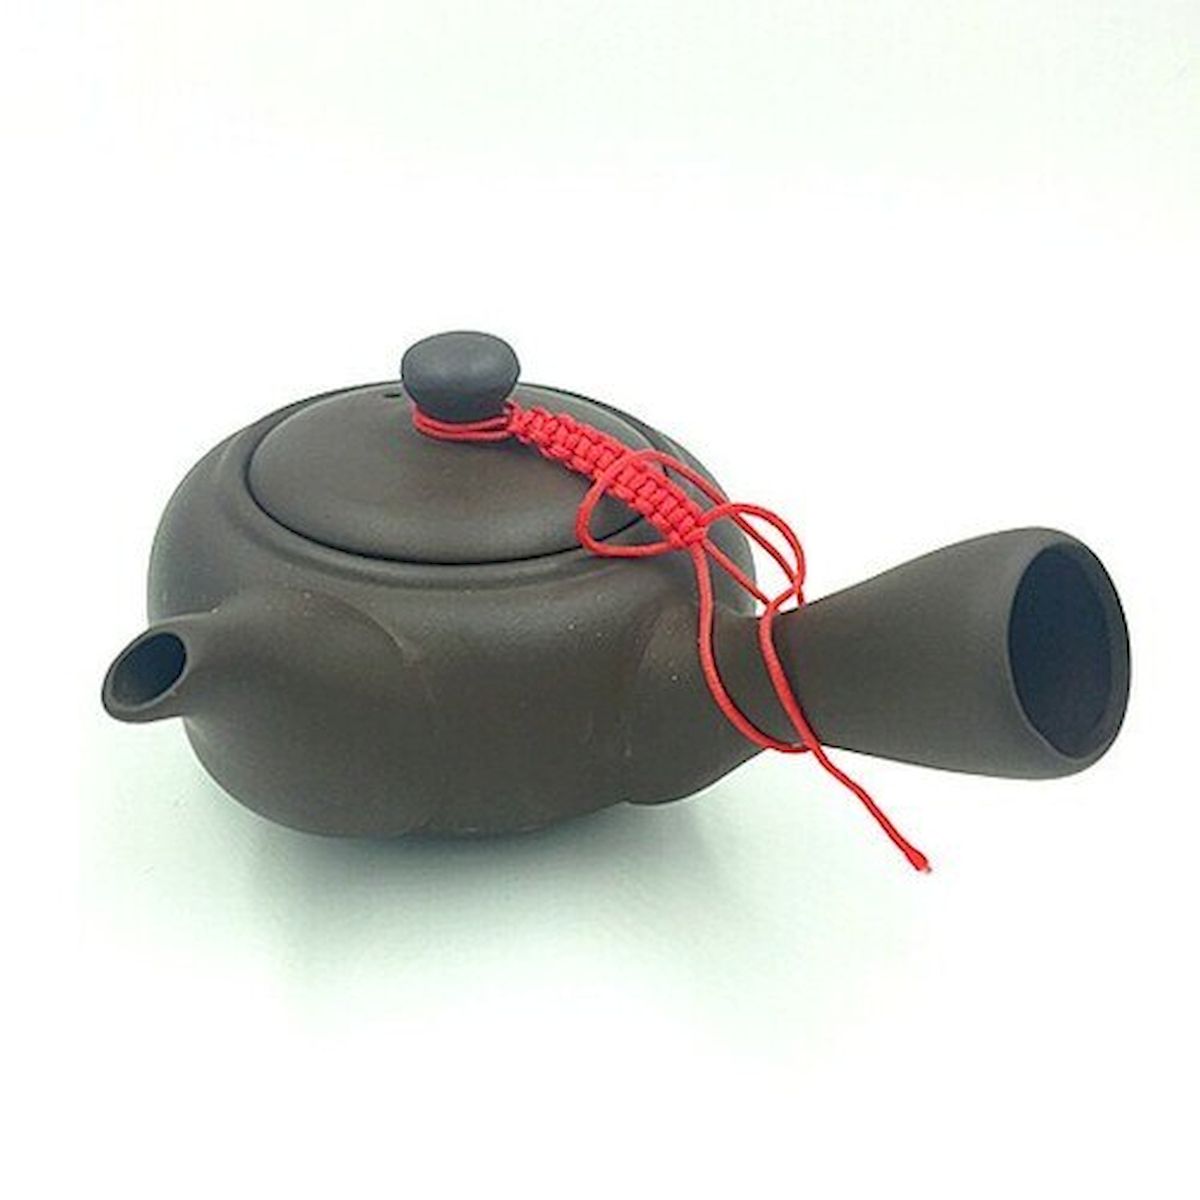 Picture of Mr. MJs HO-YX-1009 Yixing Clay Teapot